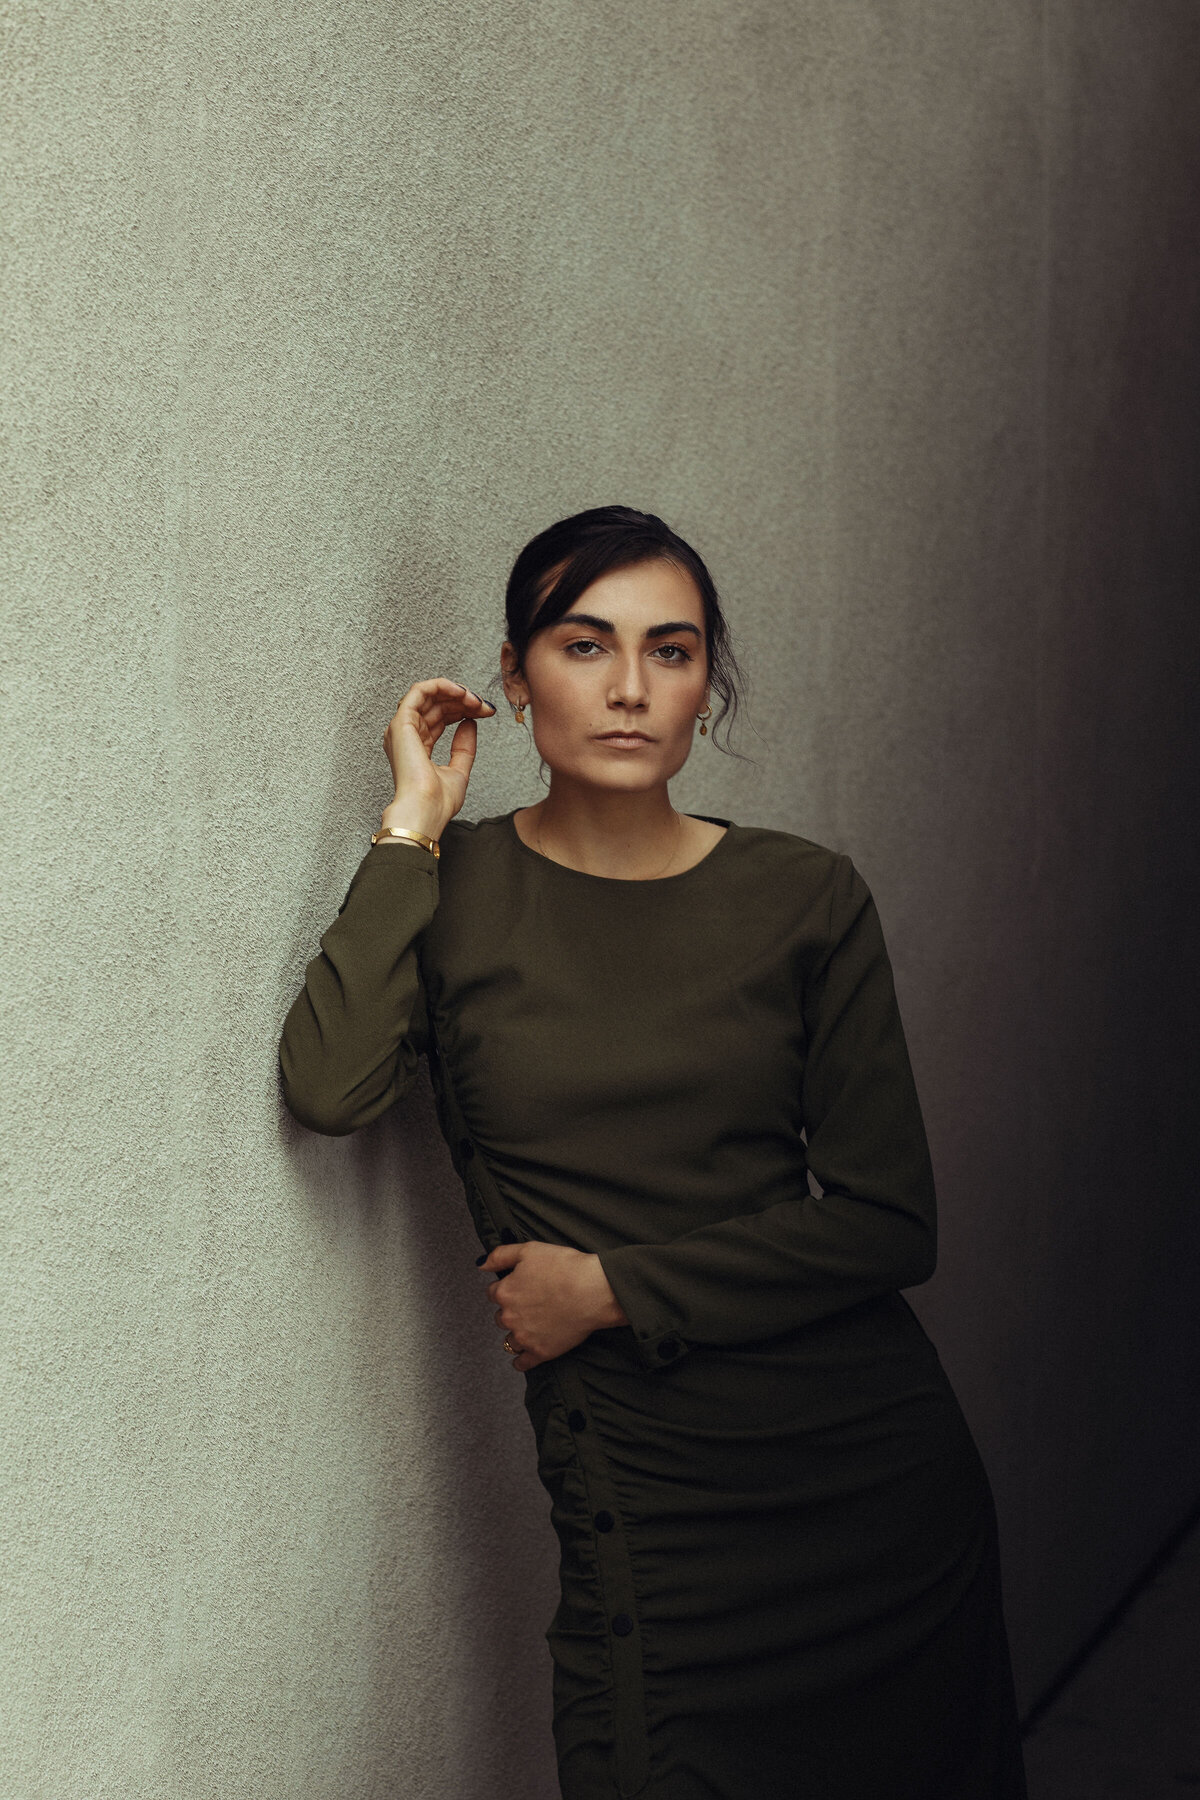 Portrait Photo Of Young Woman In Dark Green Dress Leaning Against a Wall Los Angeles